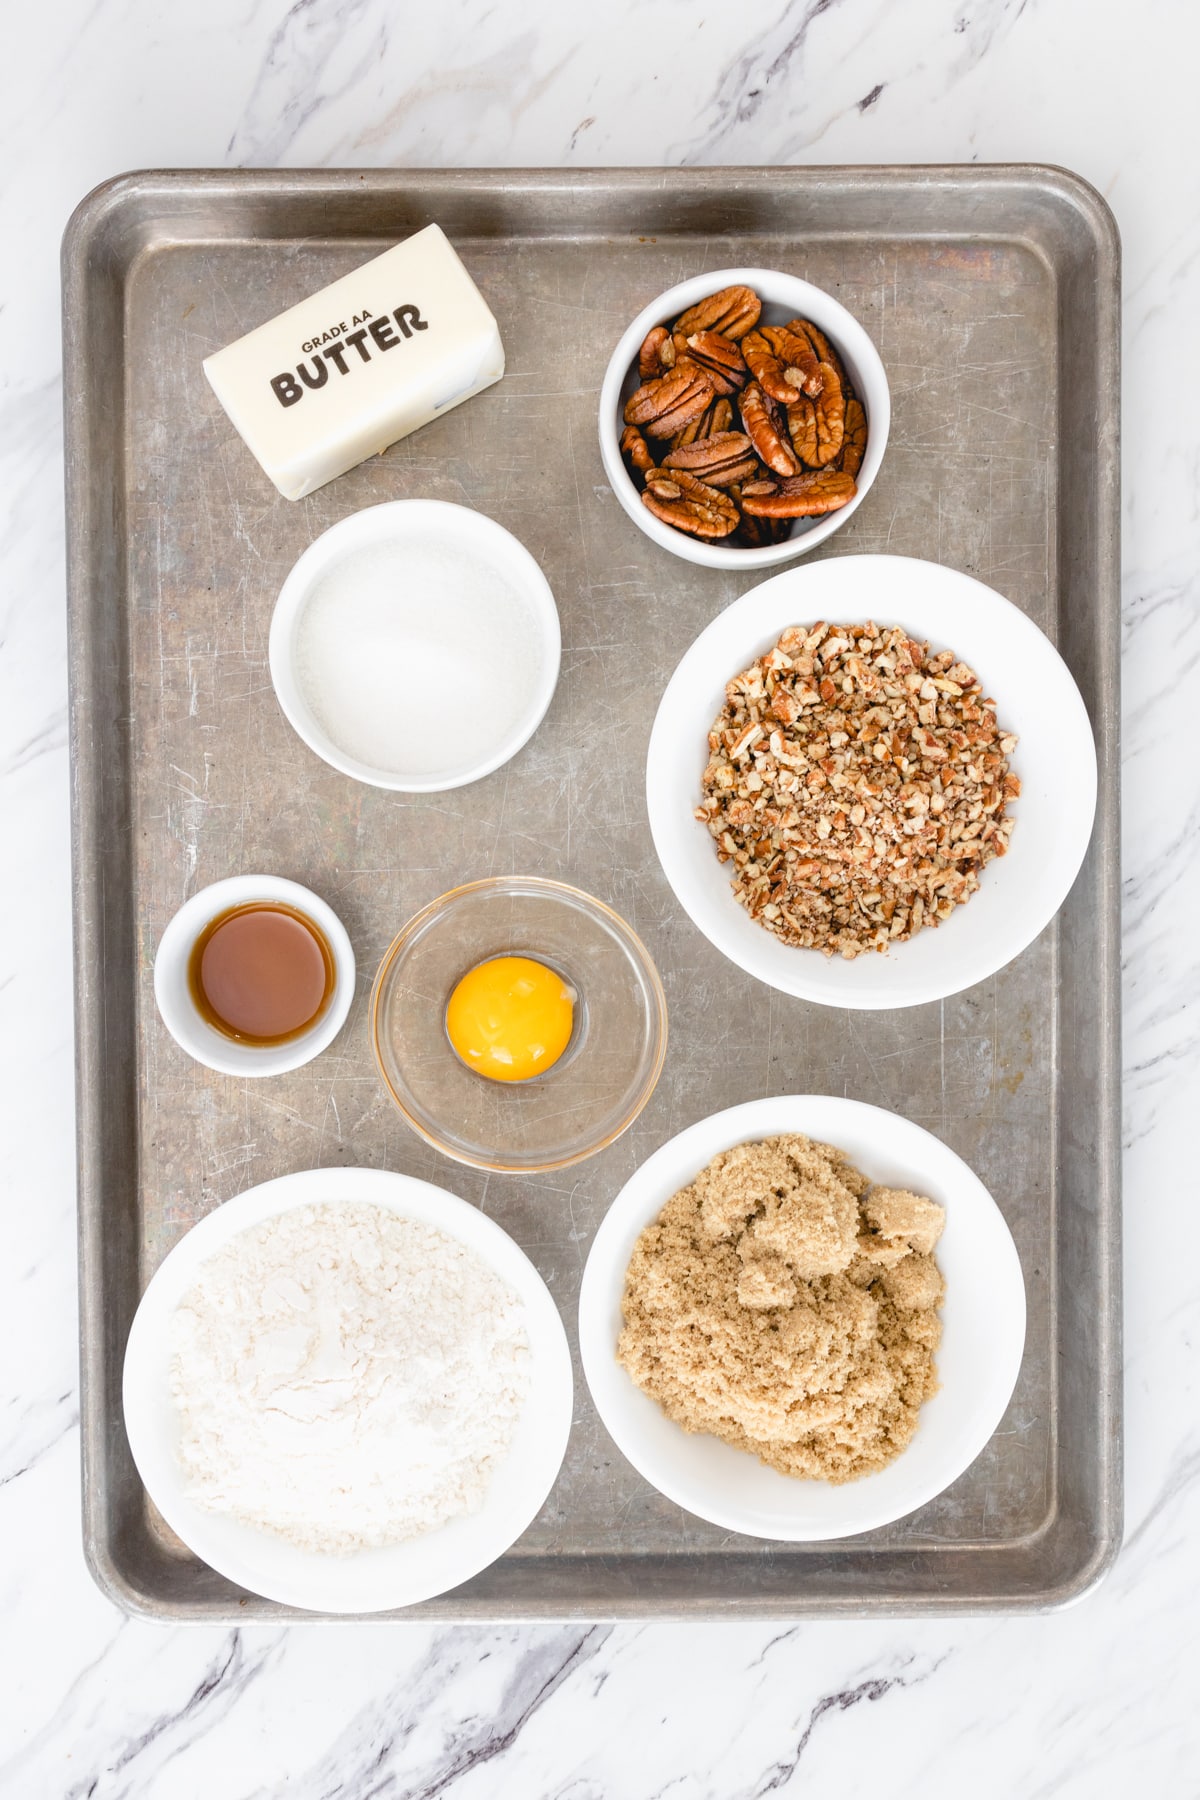 Top view of the ingredients needed for pecan sandies cookies in small bowls on a baking tray.